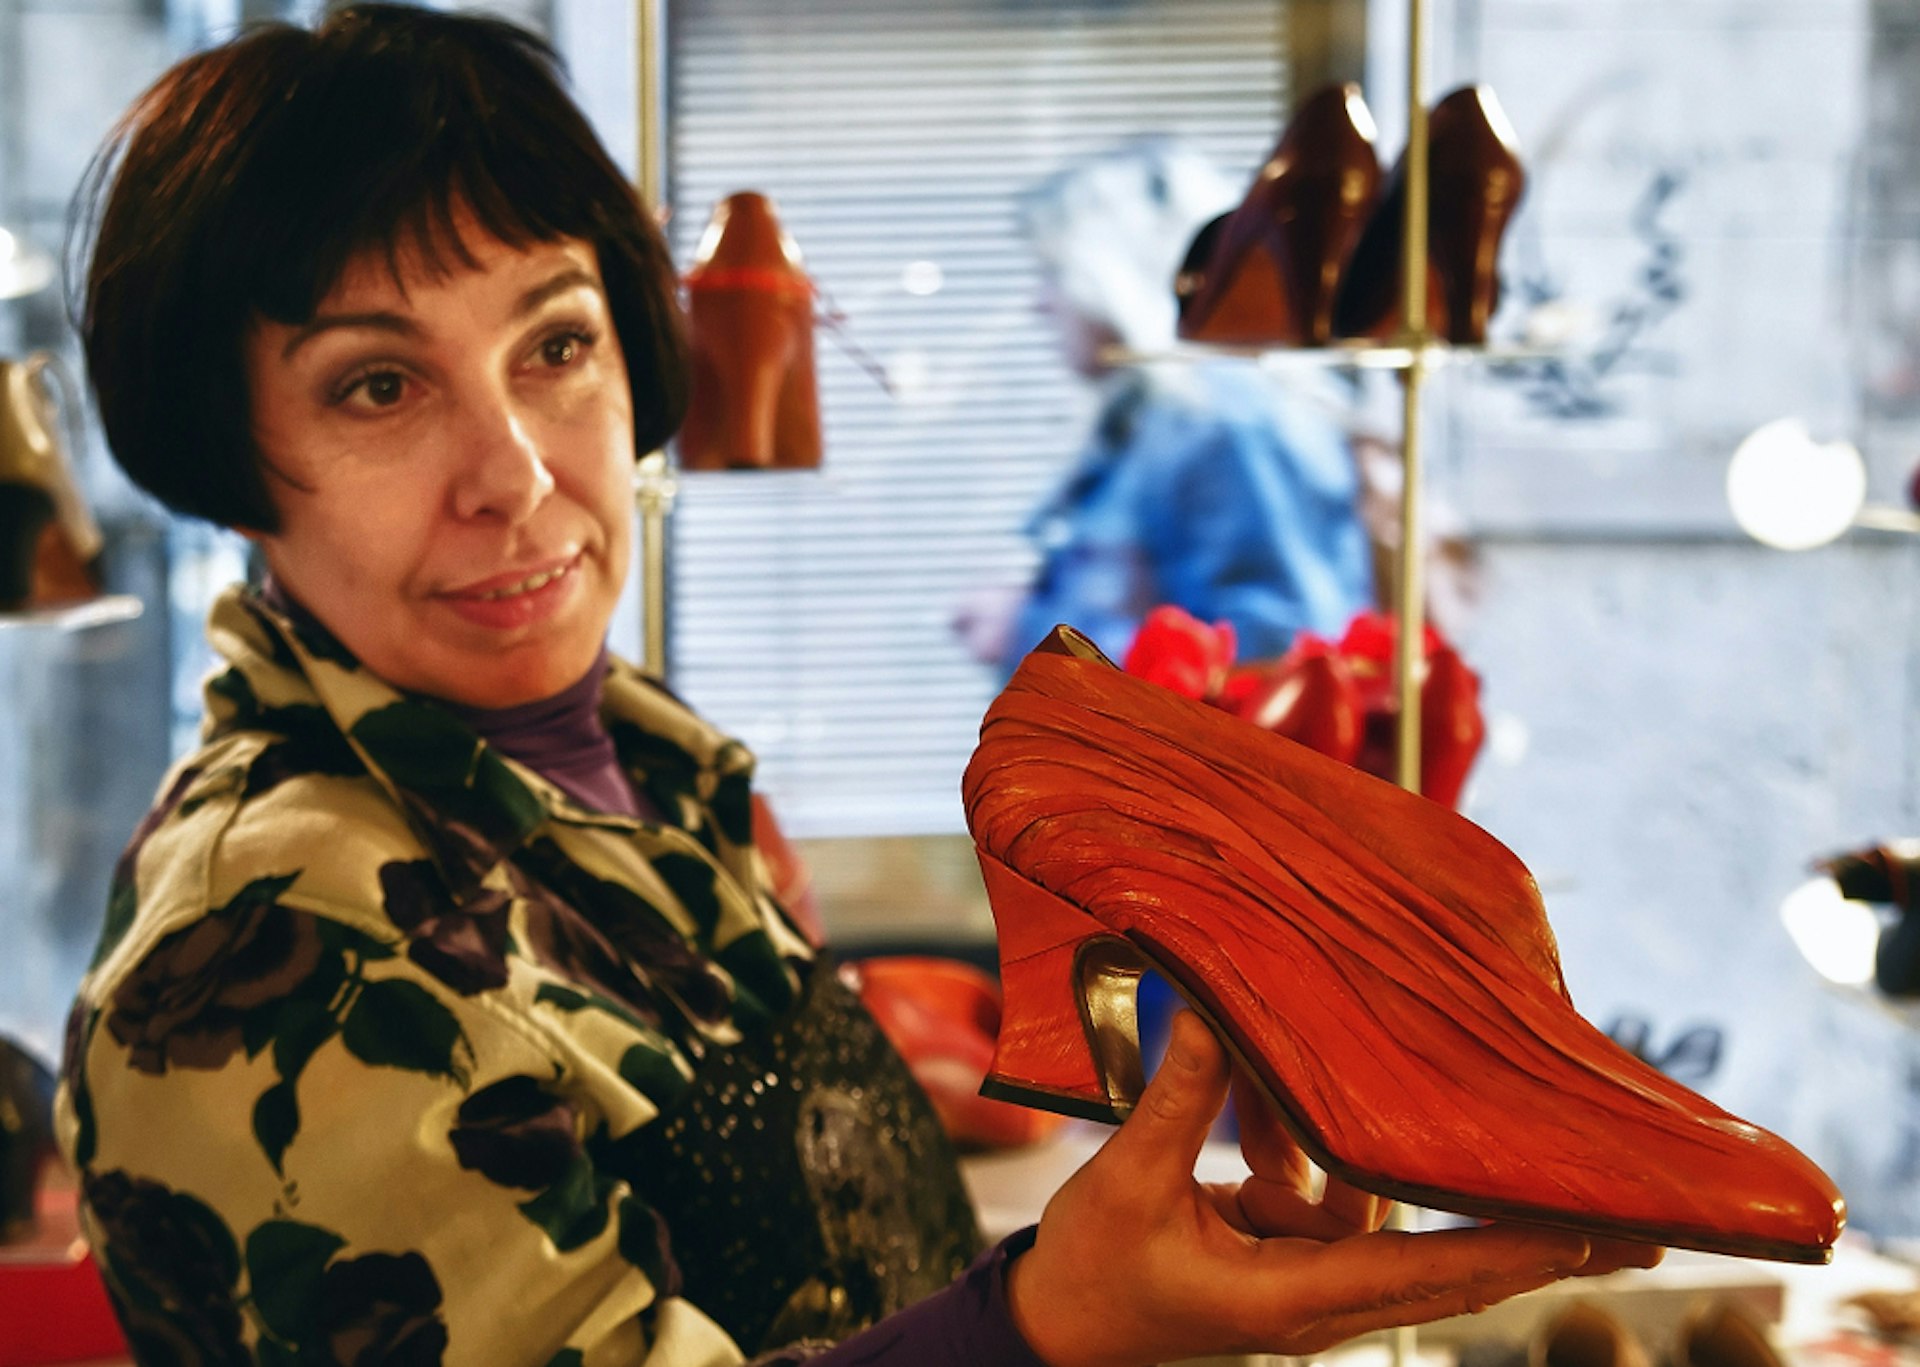 Giovanna Zanella shows off her handcrafted shoes.